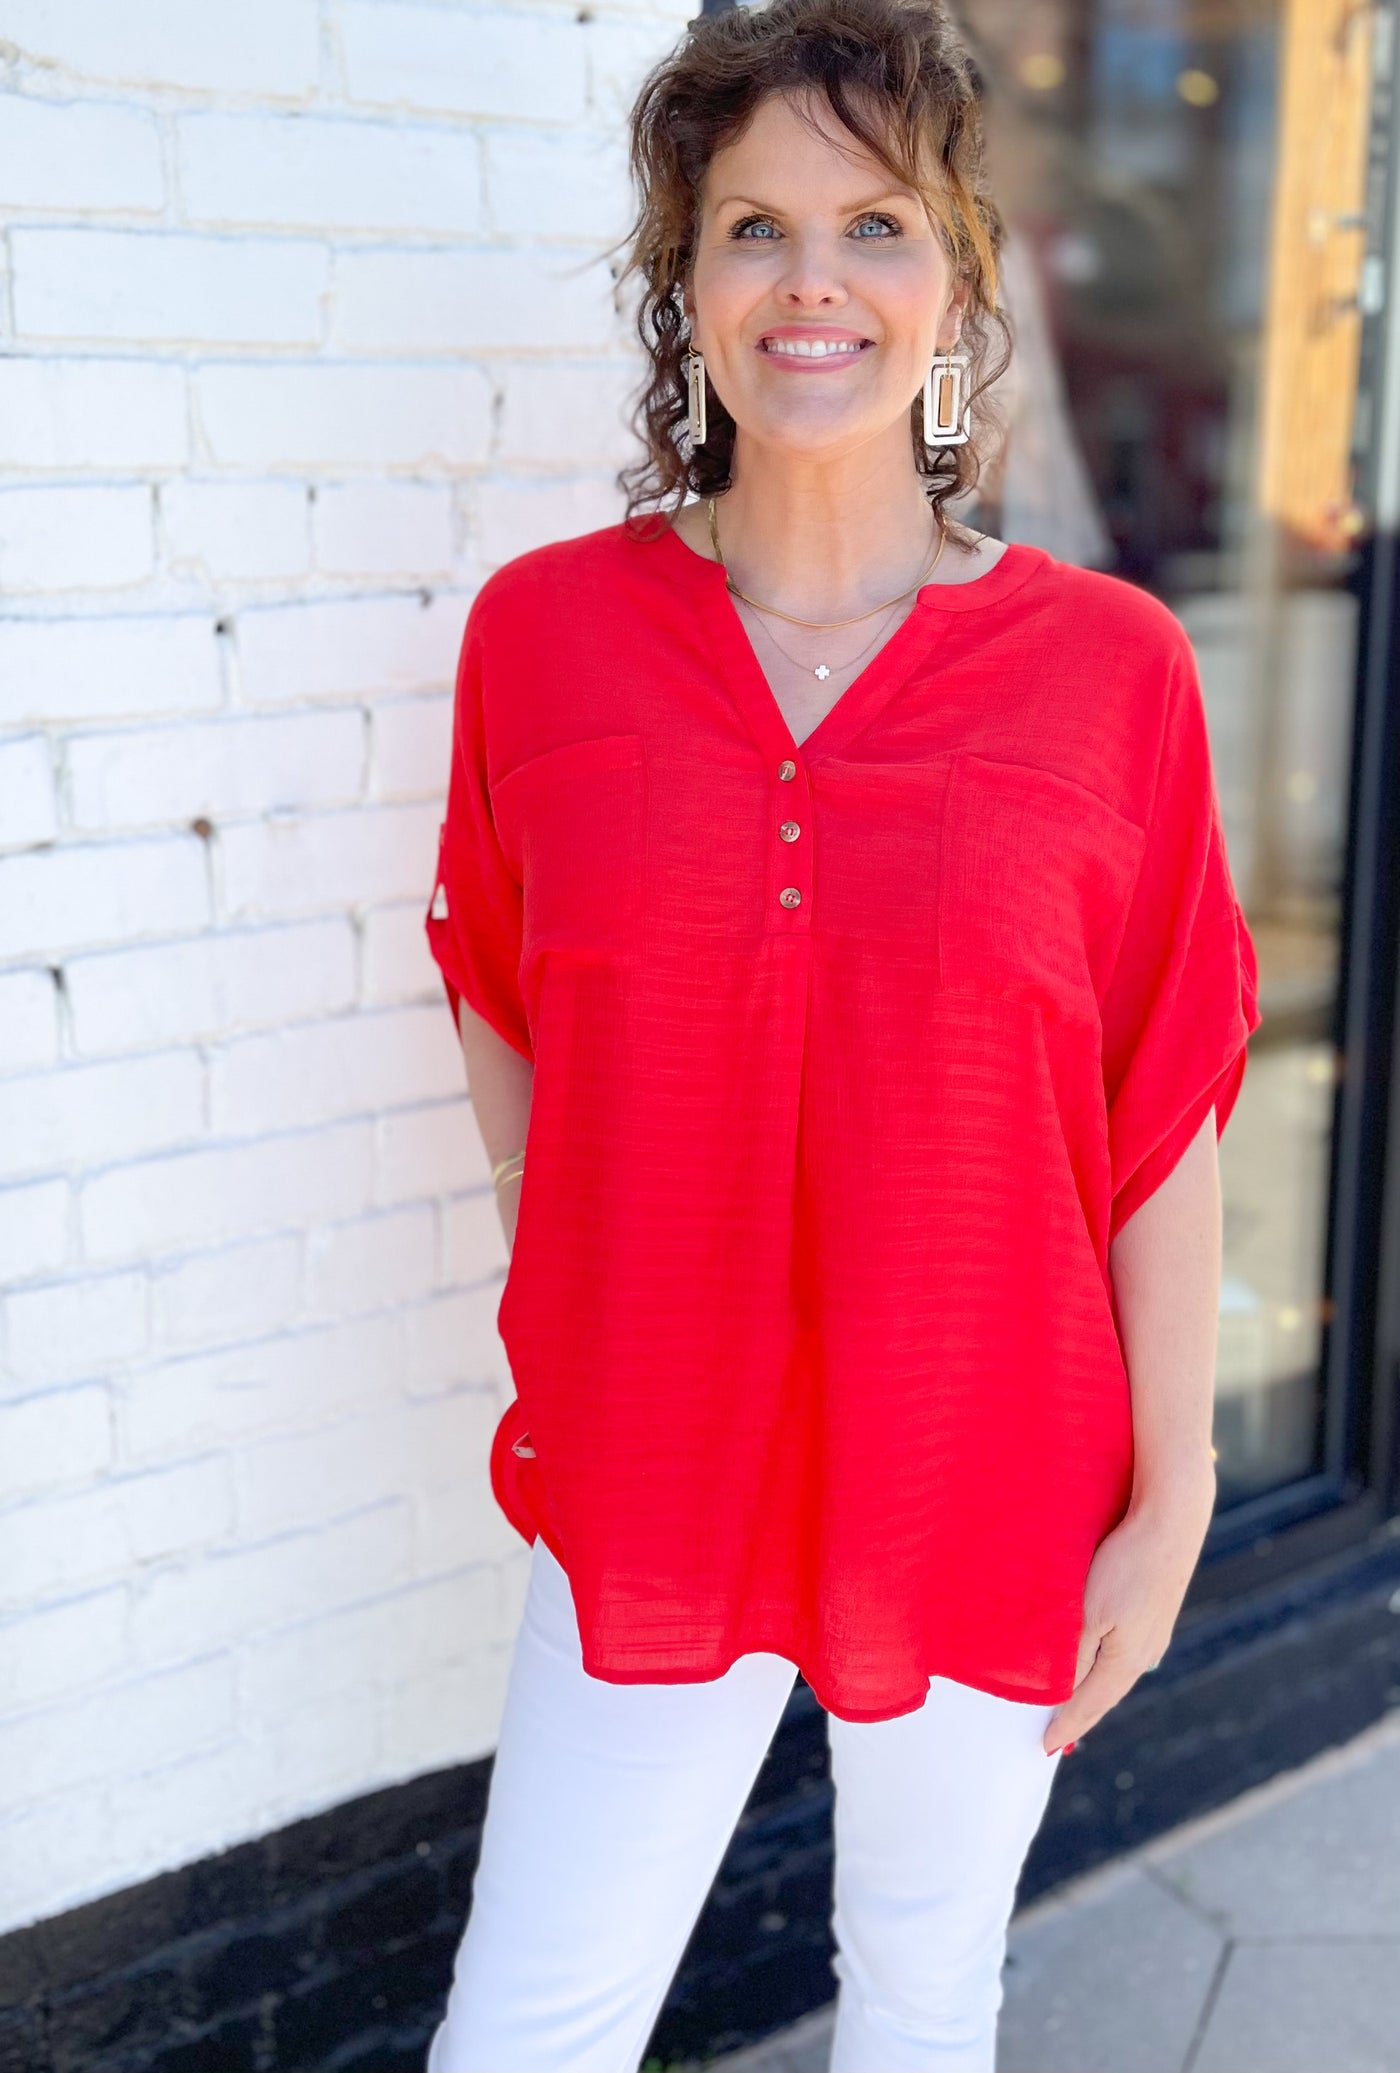 Unbelievable Red Textured Tunic Top